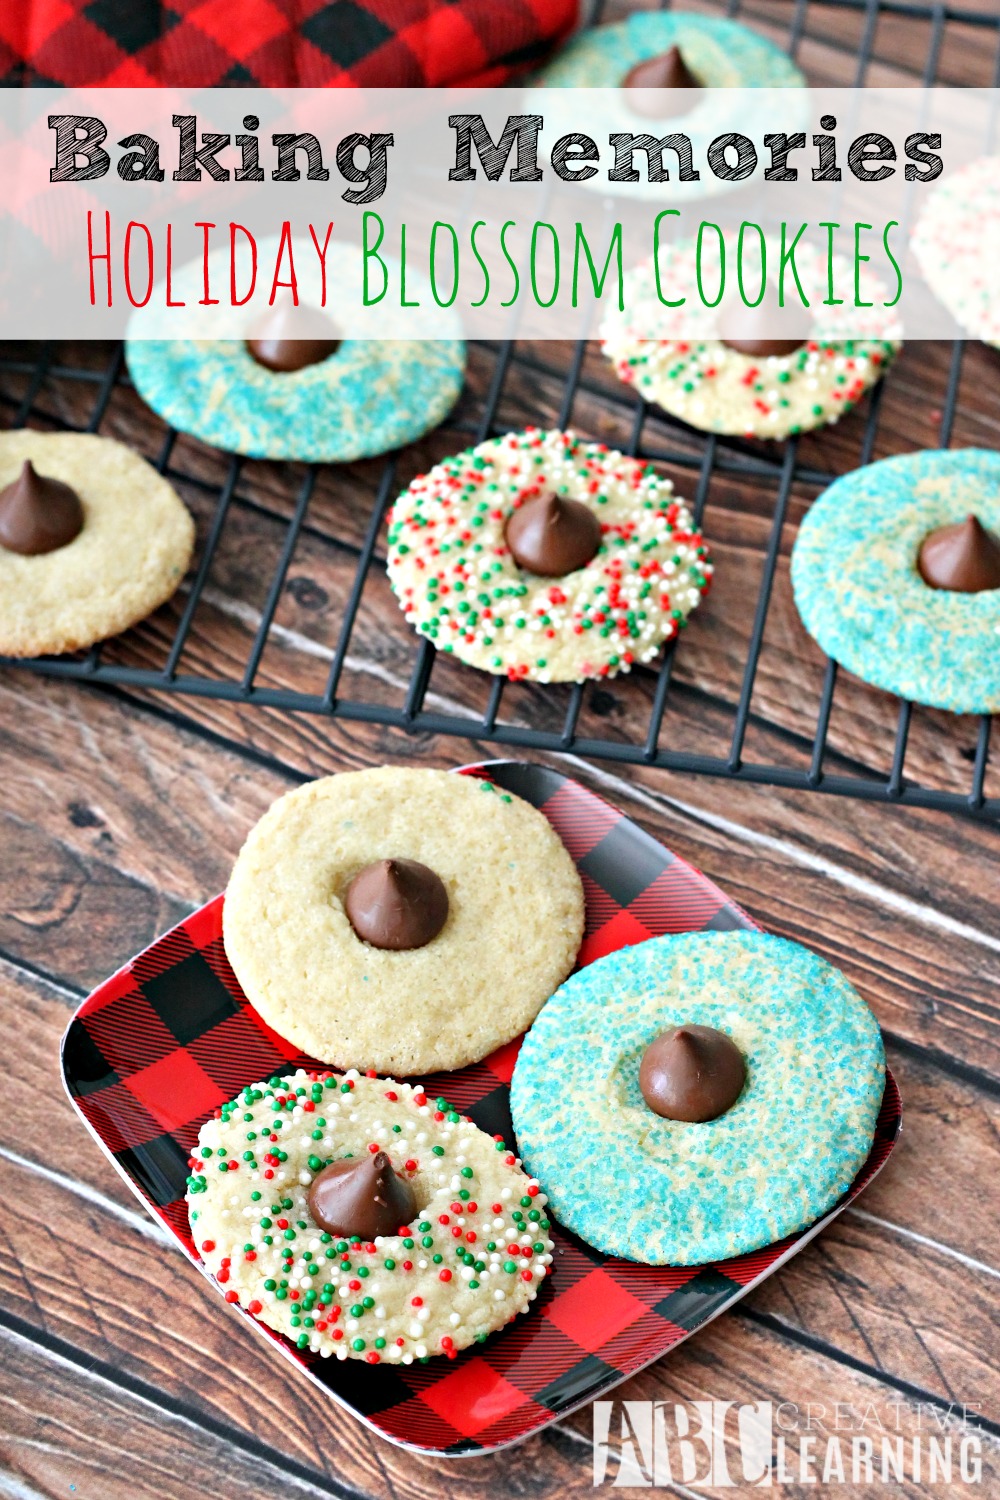 Baking Memories Holiday Blossom Cookies